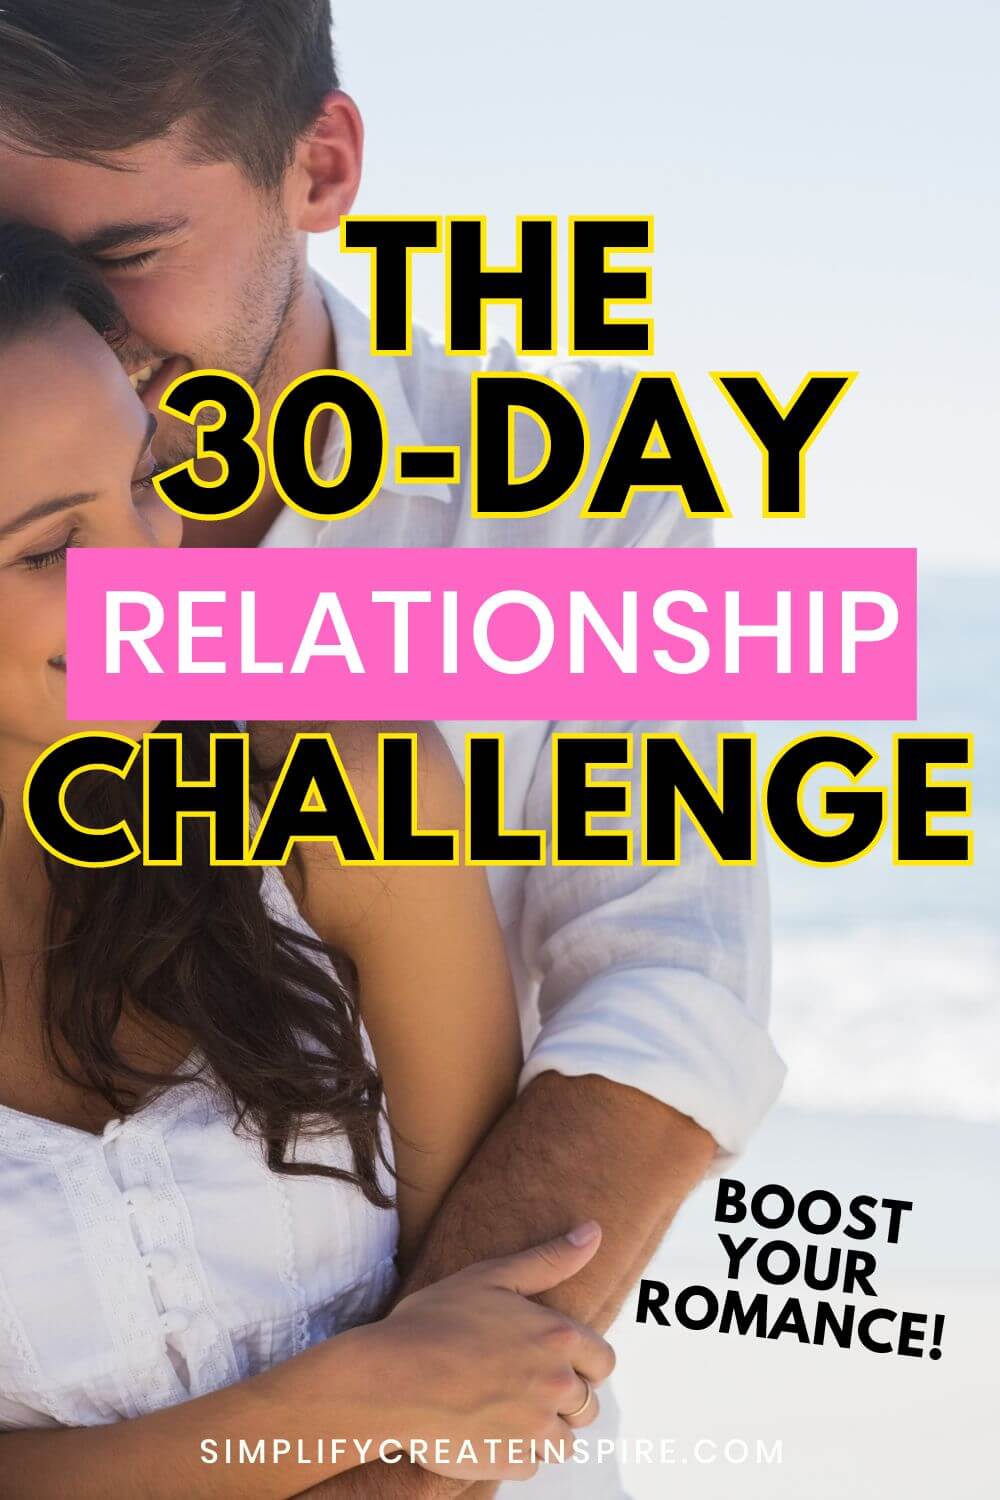 Pinterest image the 30 day relationship challenge to boost your romance with couple hugging in background.